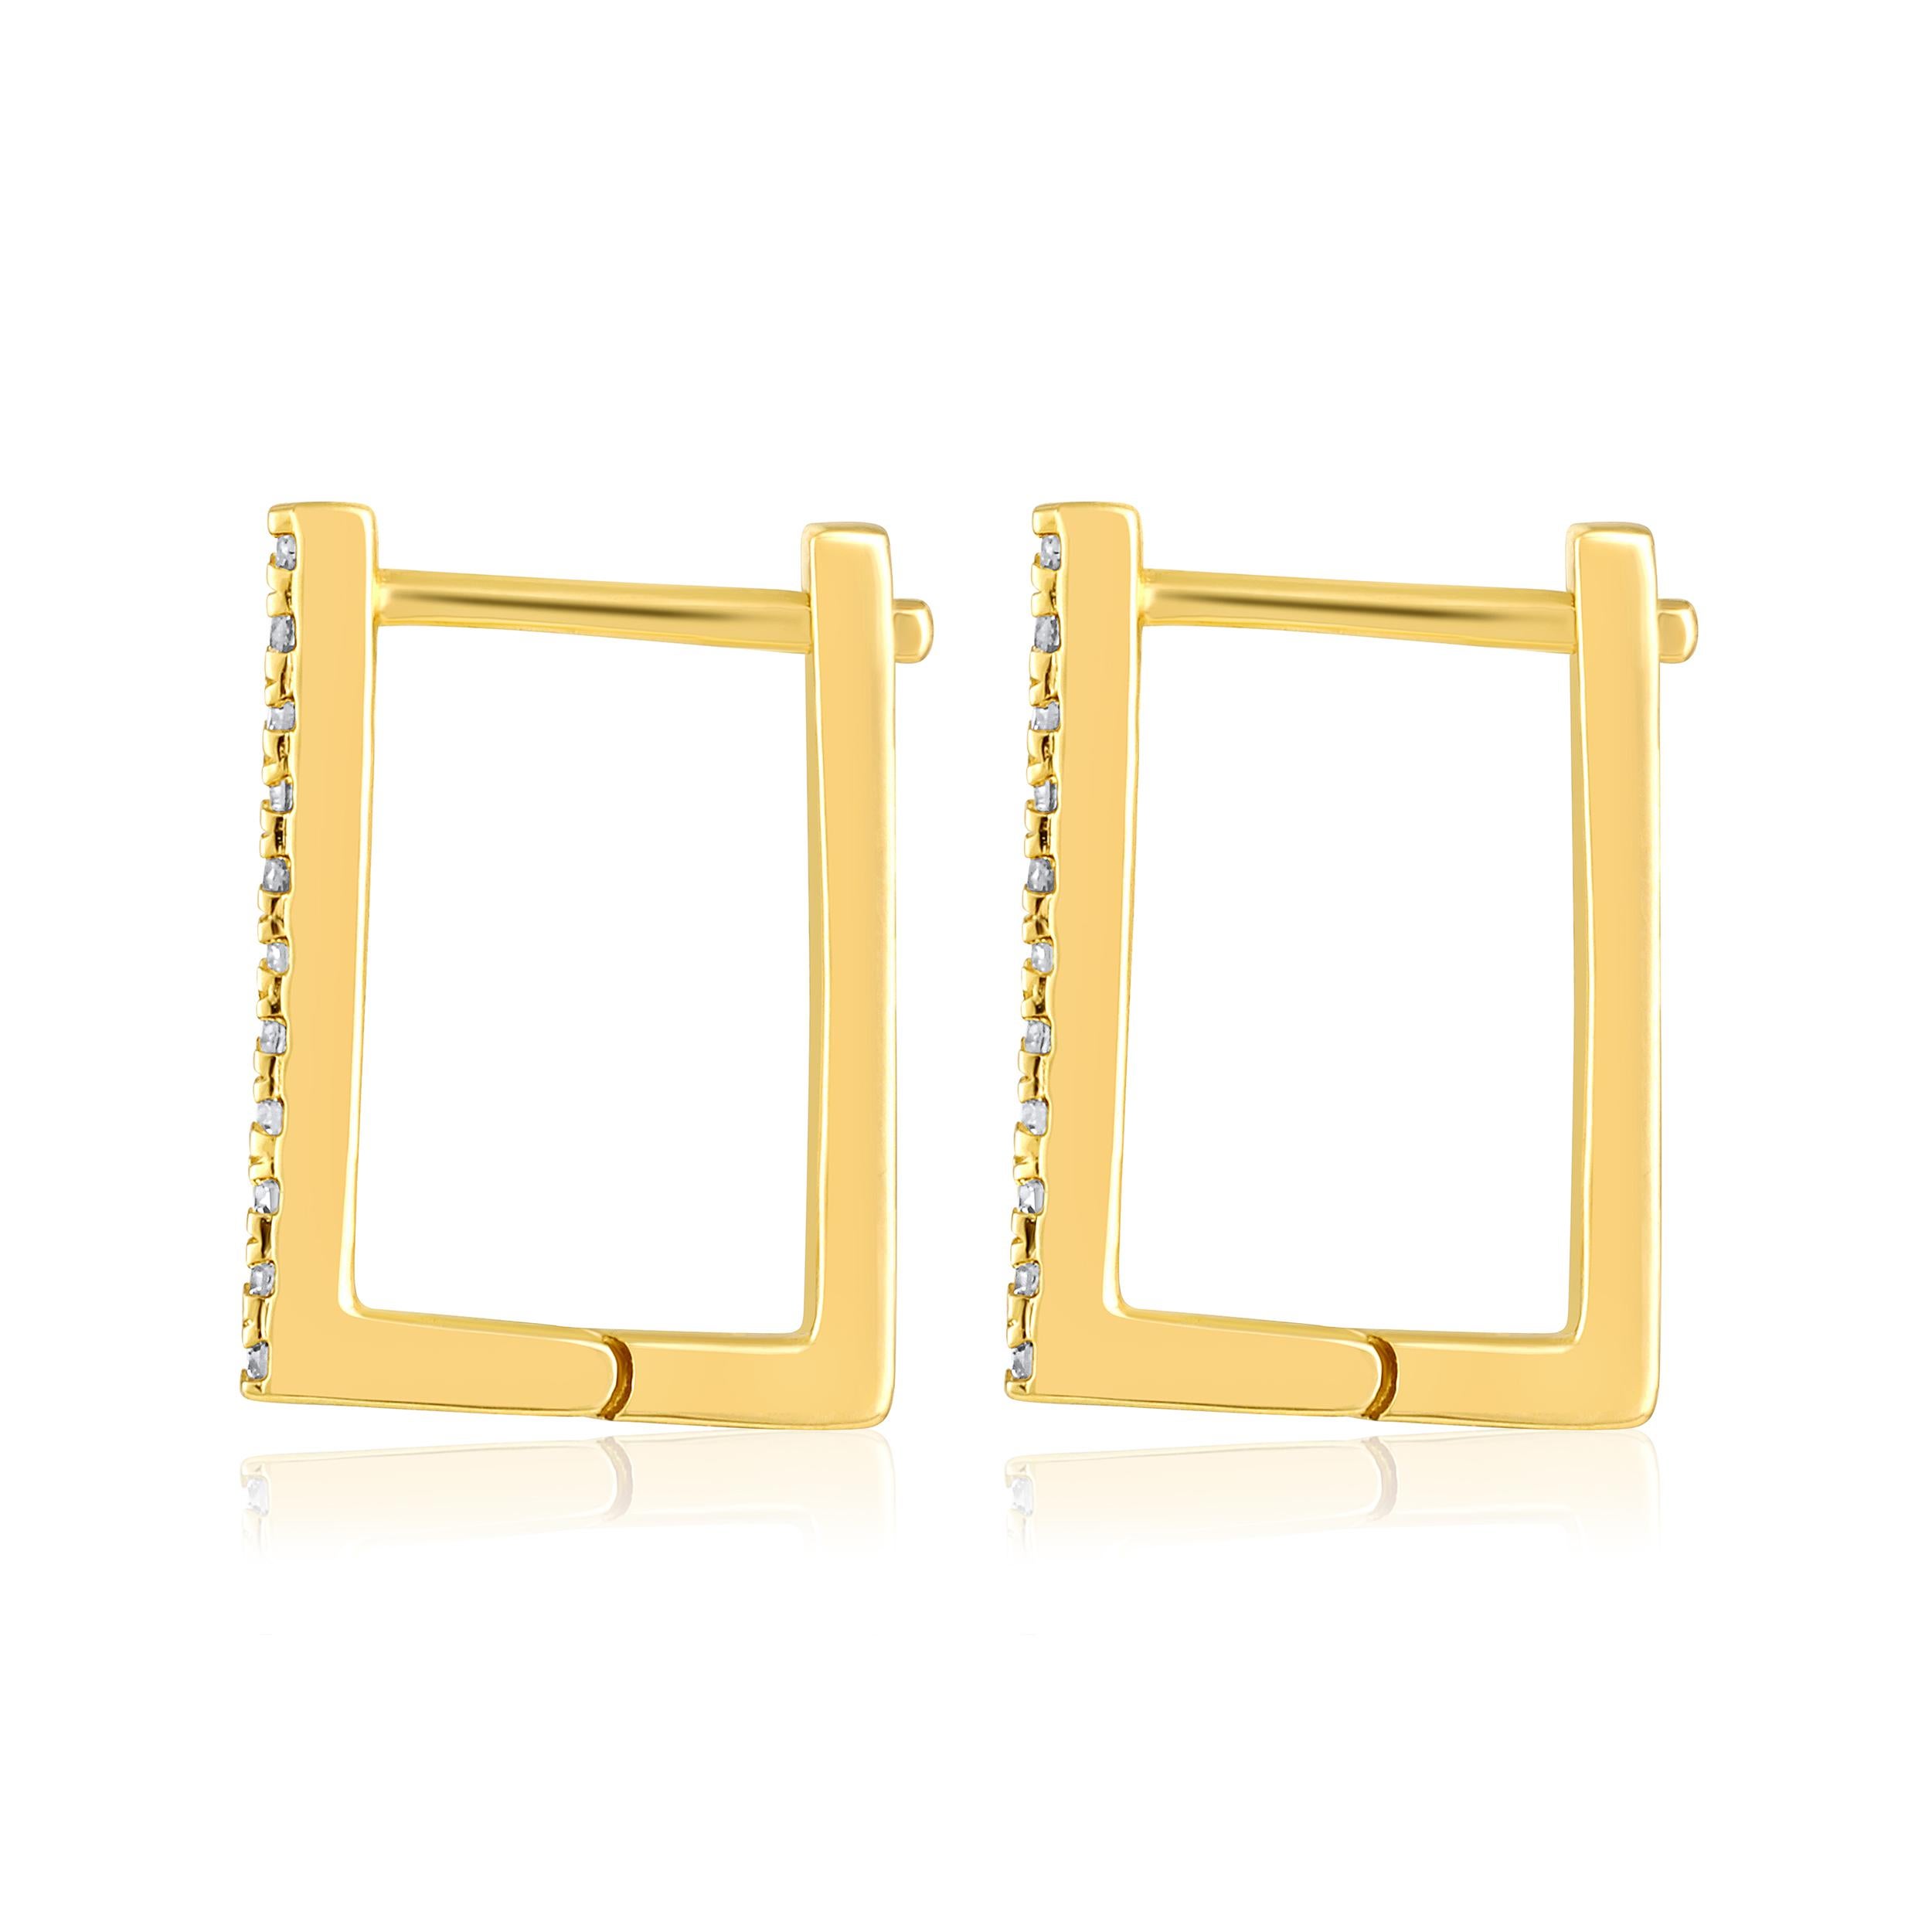 Brilliant Cut Certified 14k Gold 0.1 Carat Natural Diamond Inside Out Rectangle Hoop Earrings For Sale